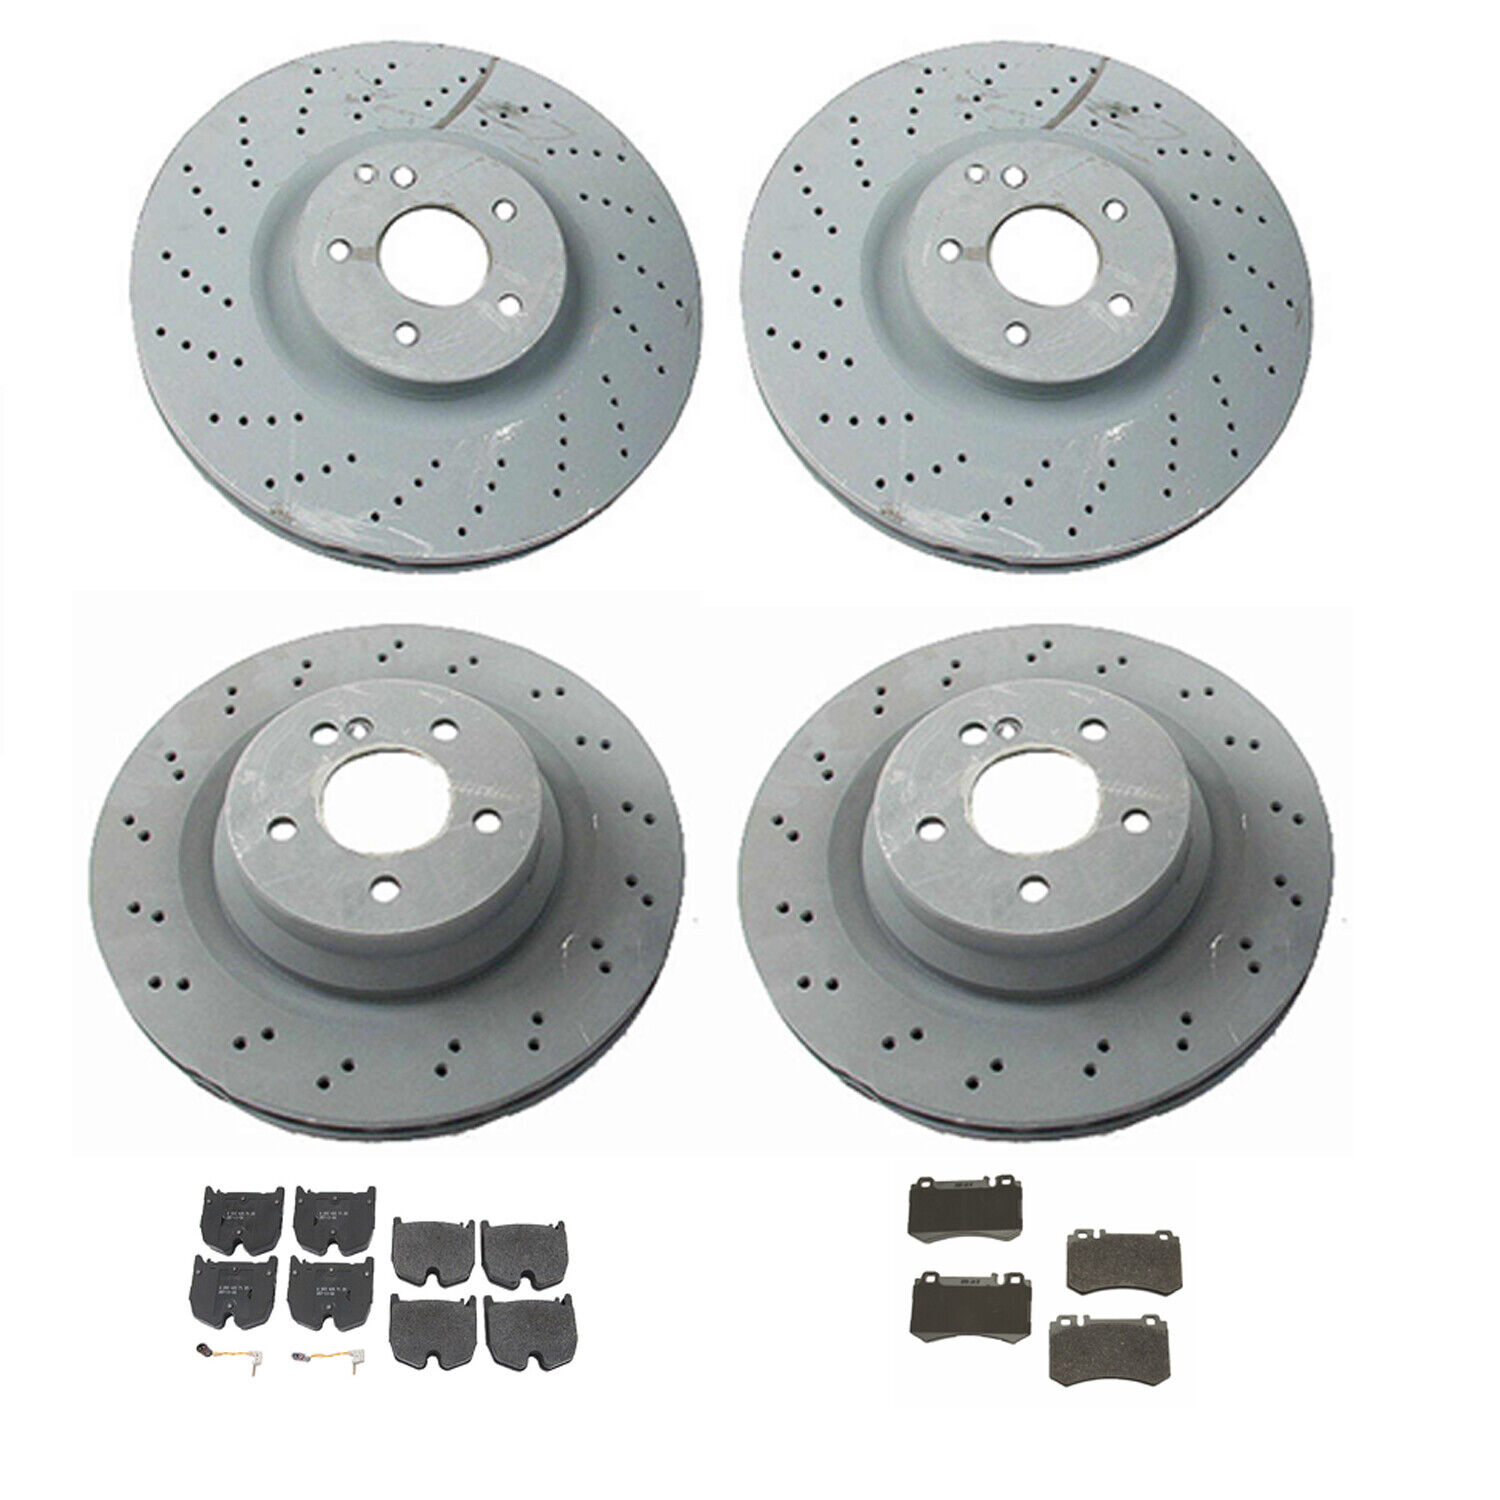 Genuine OEM Front & Rear Vented Cross-Drilled Rotors & Pads Kit For Mercedes